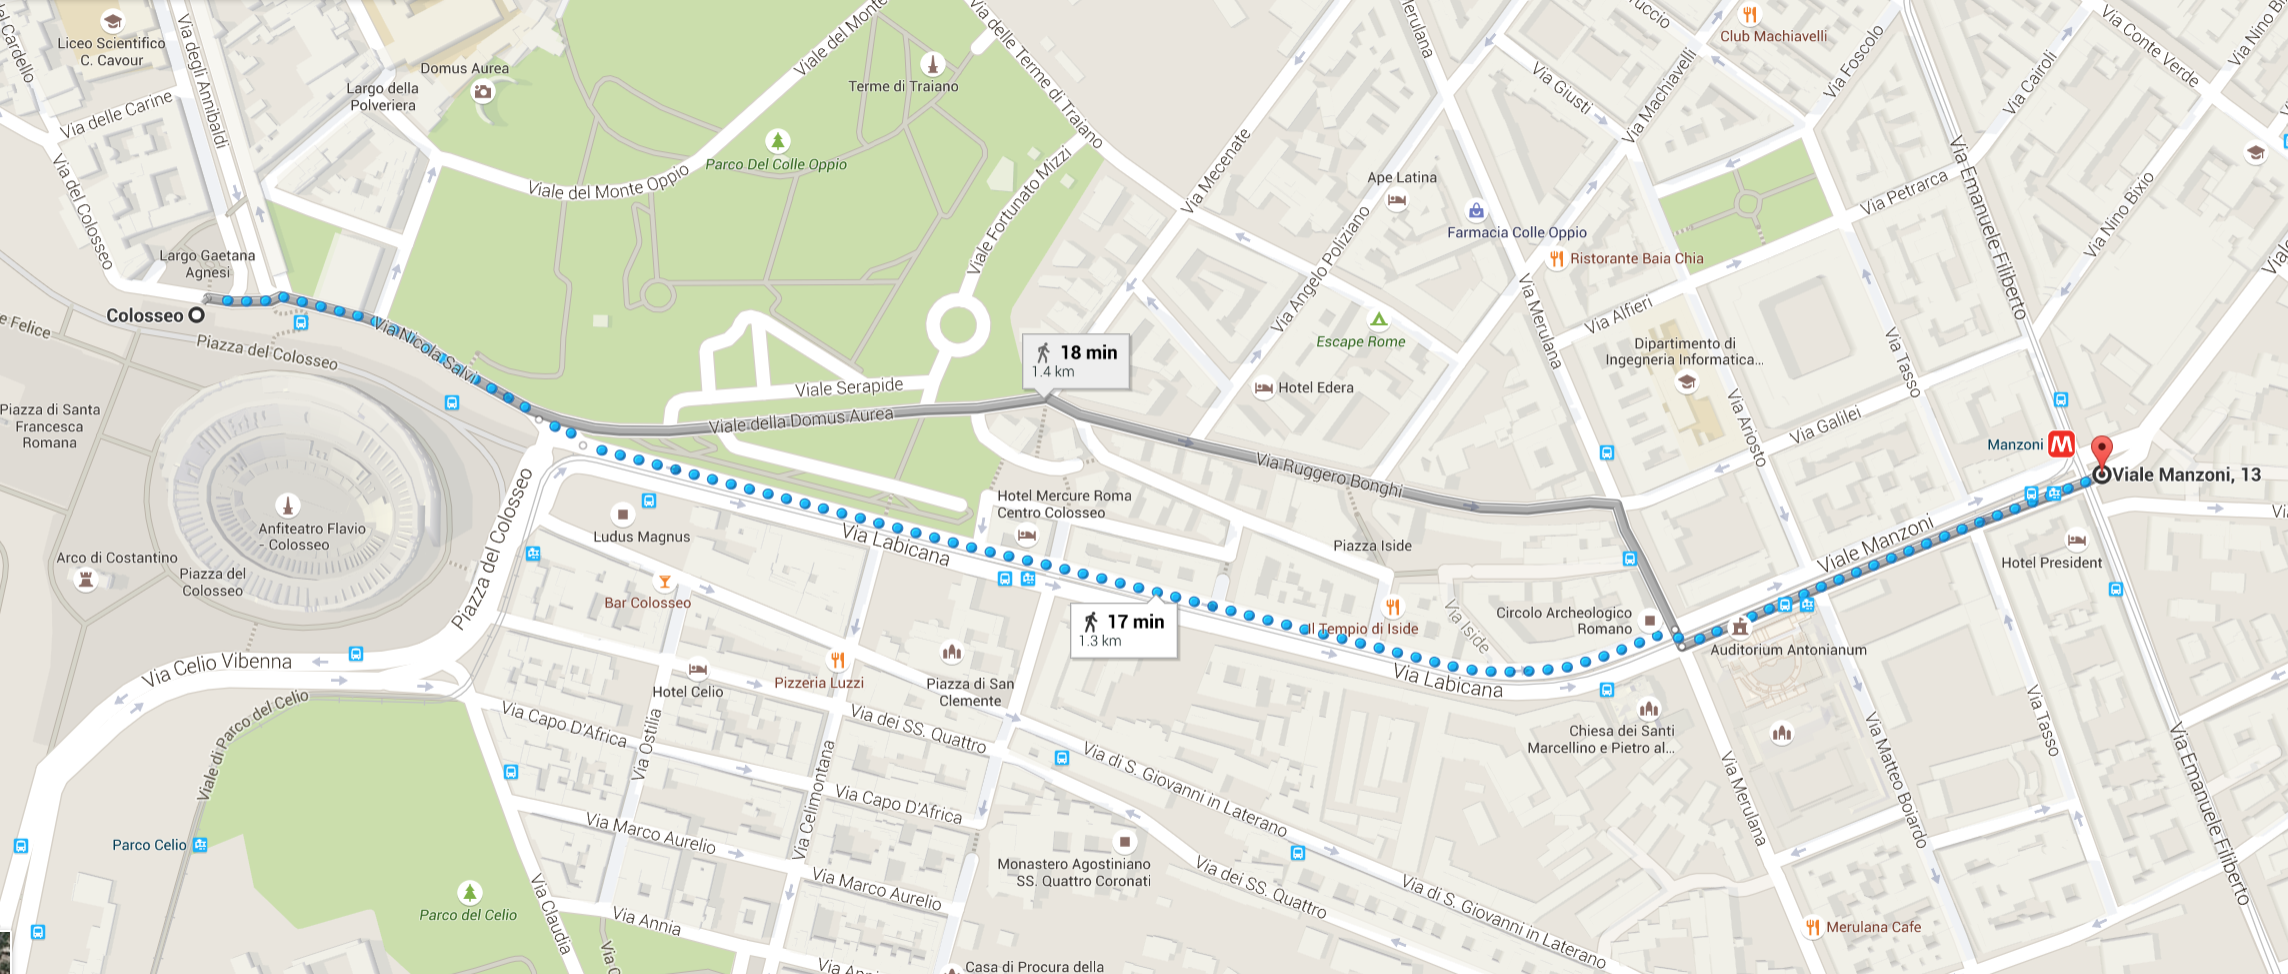 GoogleMap of our B&B in Rome to the Coliseum